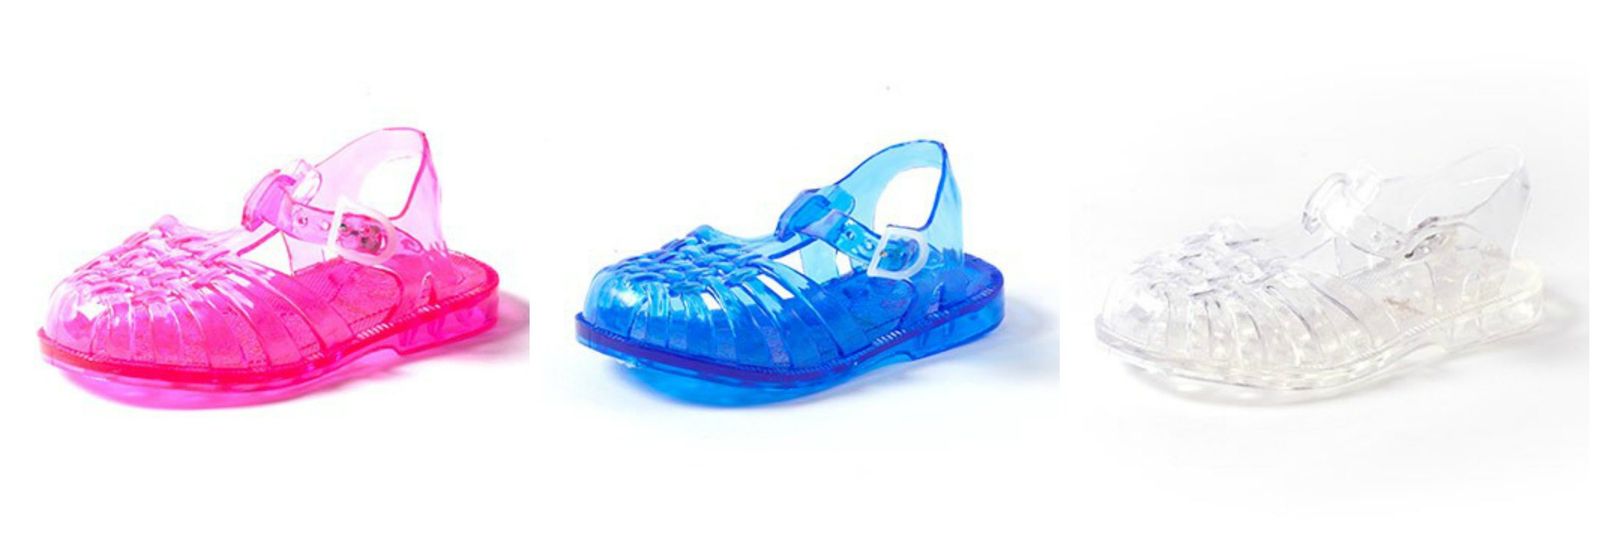 jelly beans shoes website